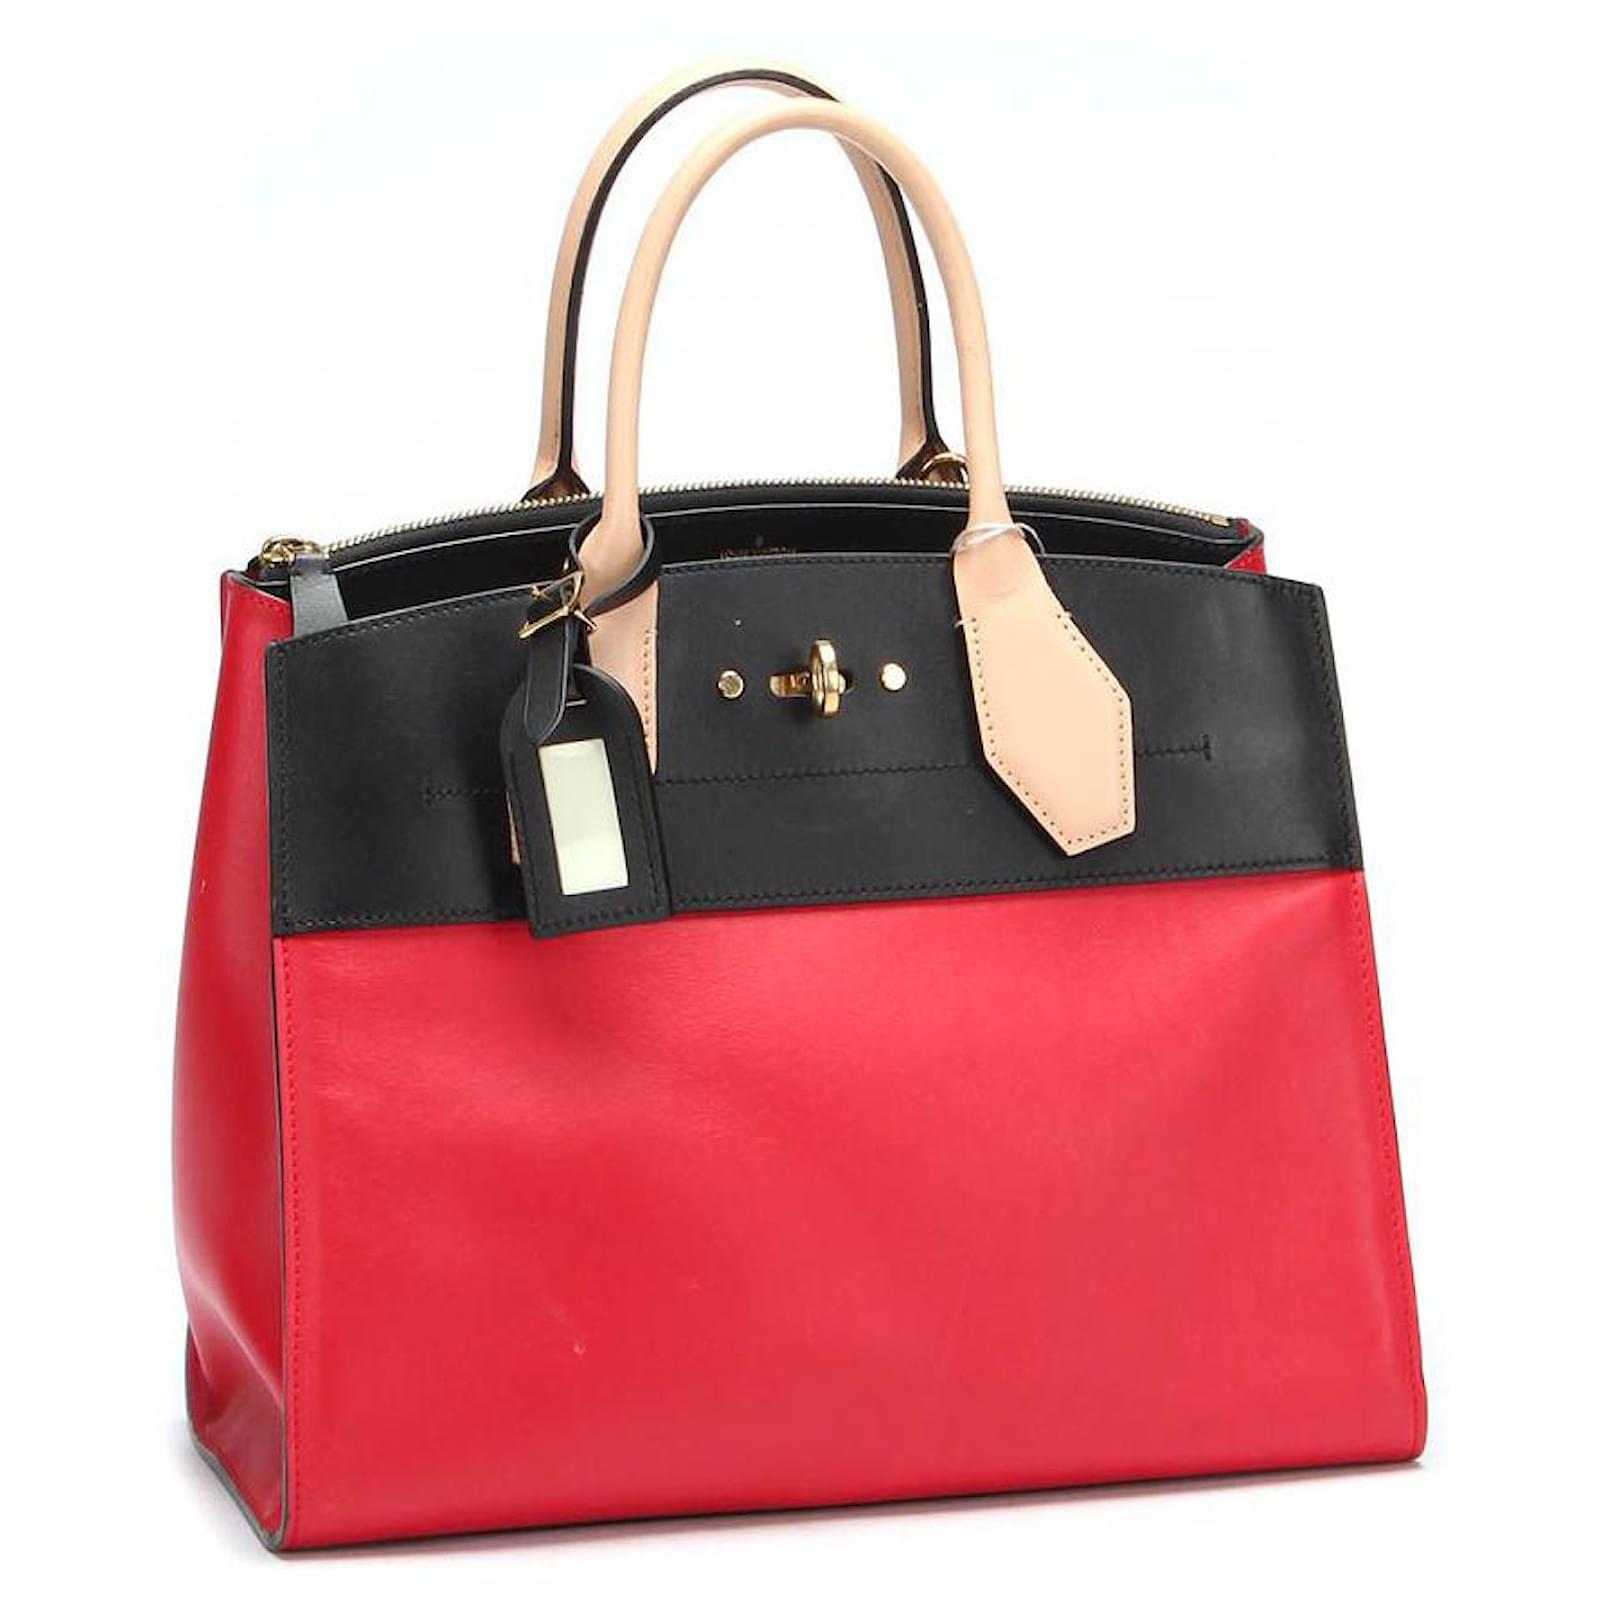 Louis Vuitton Tricolor Leather City Steamer Bag Red Pony-style